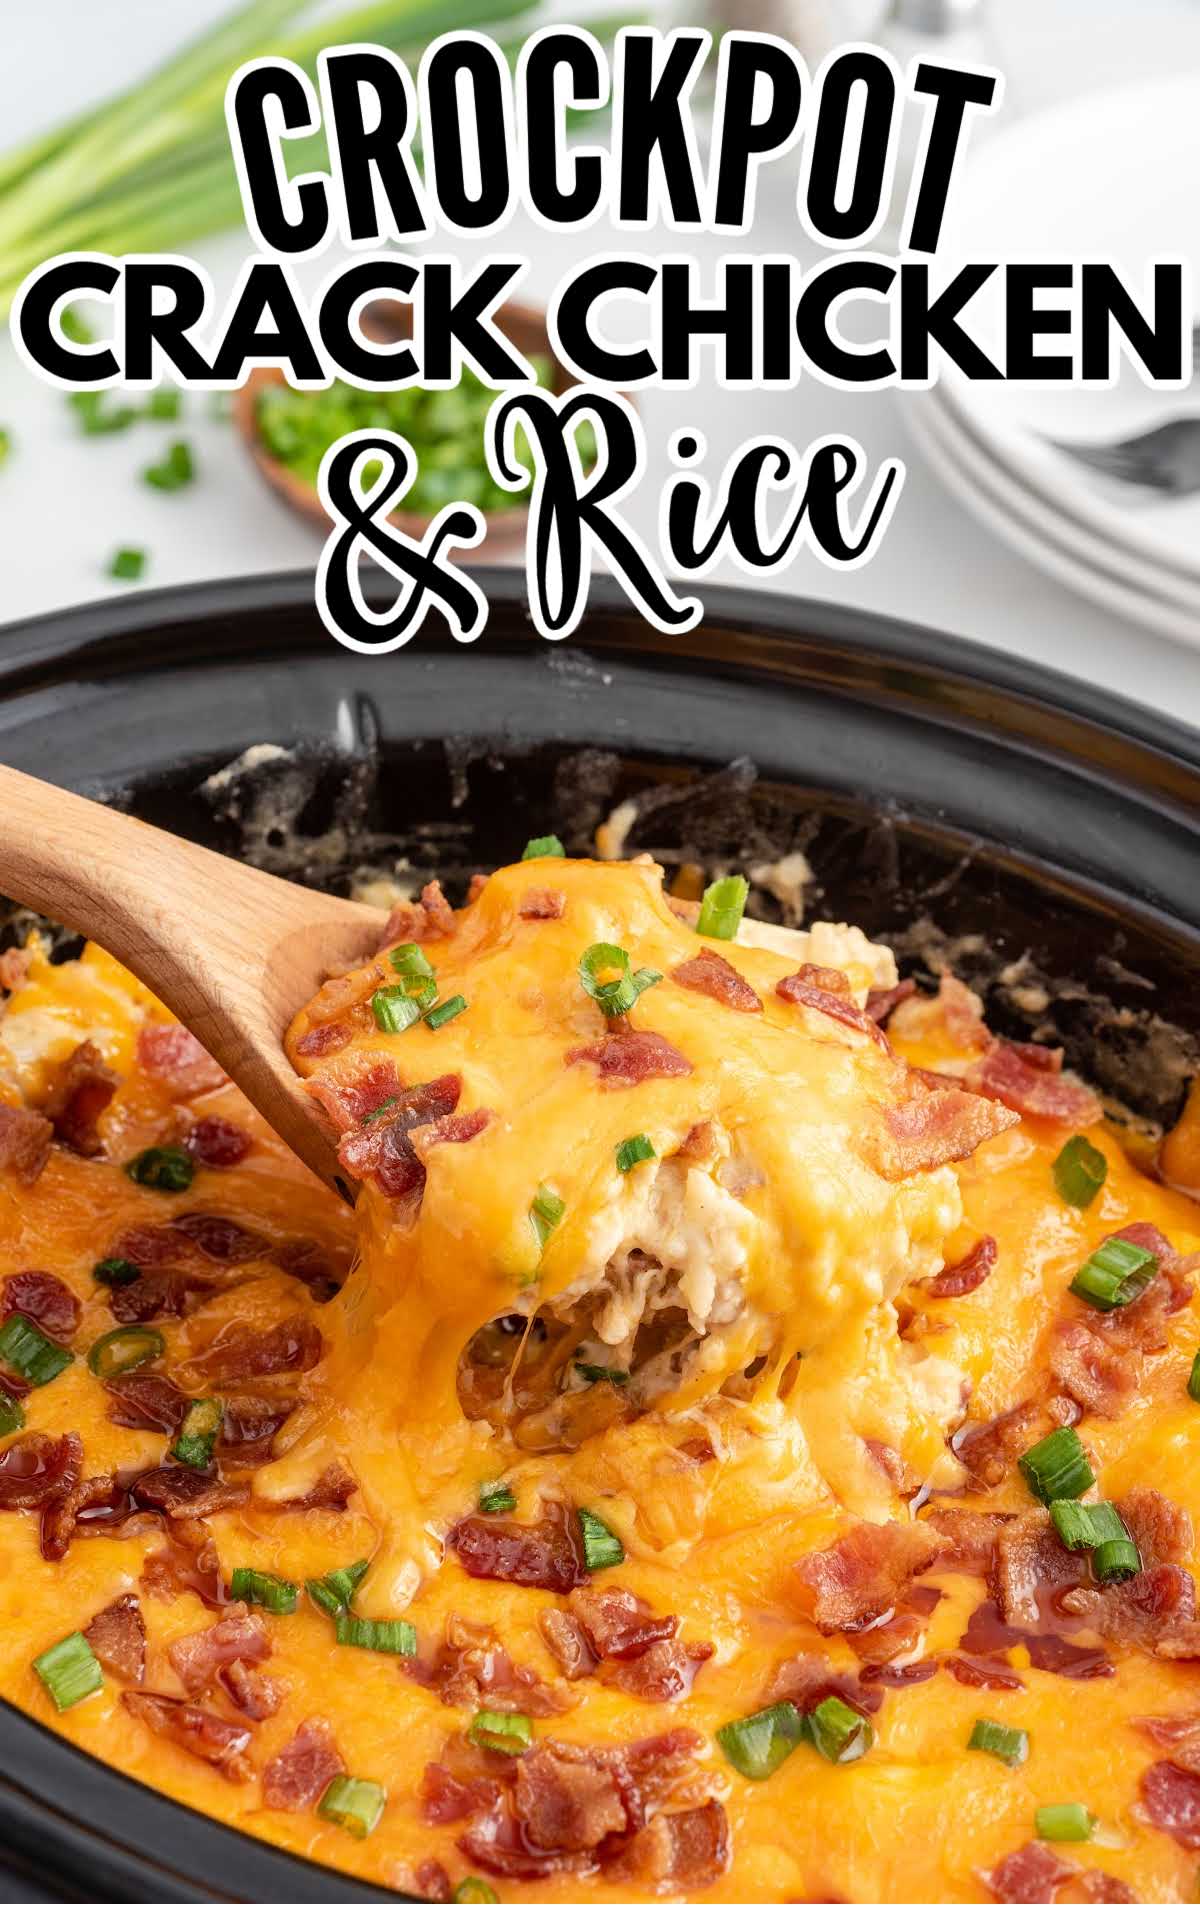 Crockpot Crack Chicken and Rice - The Best Blog Recipes